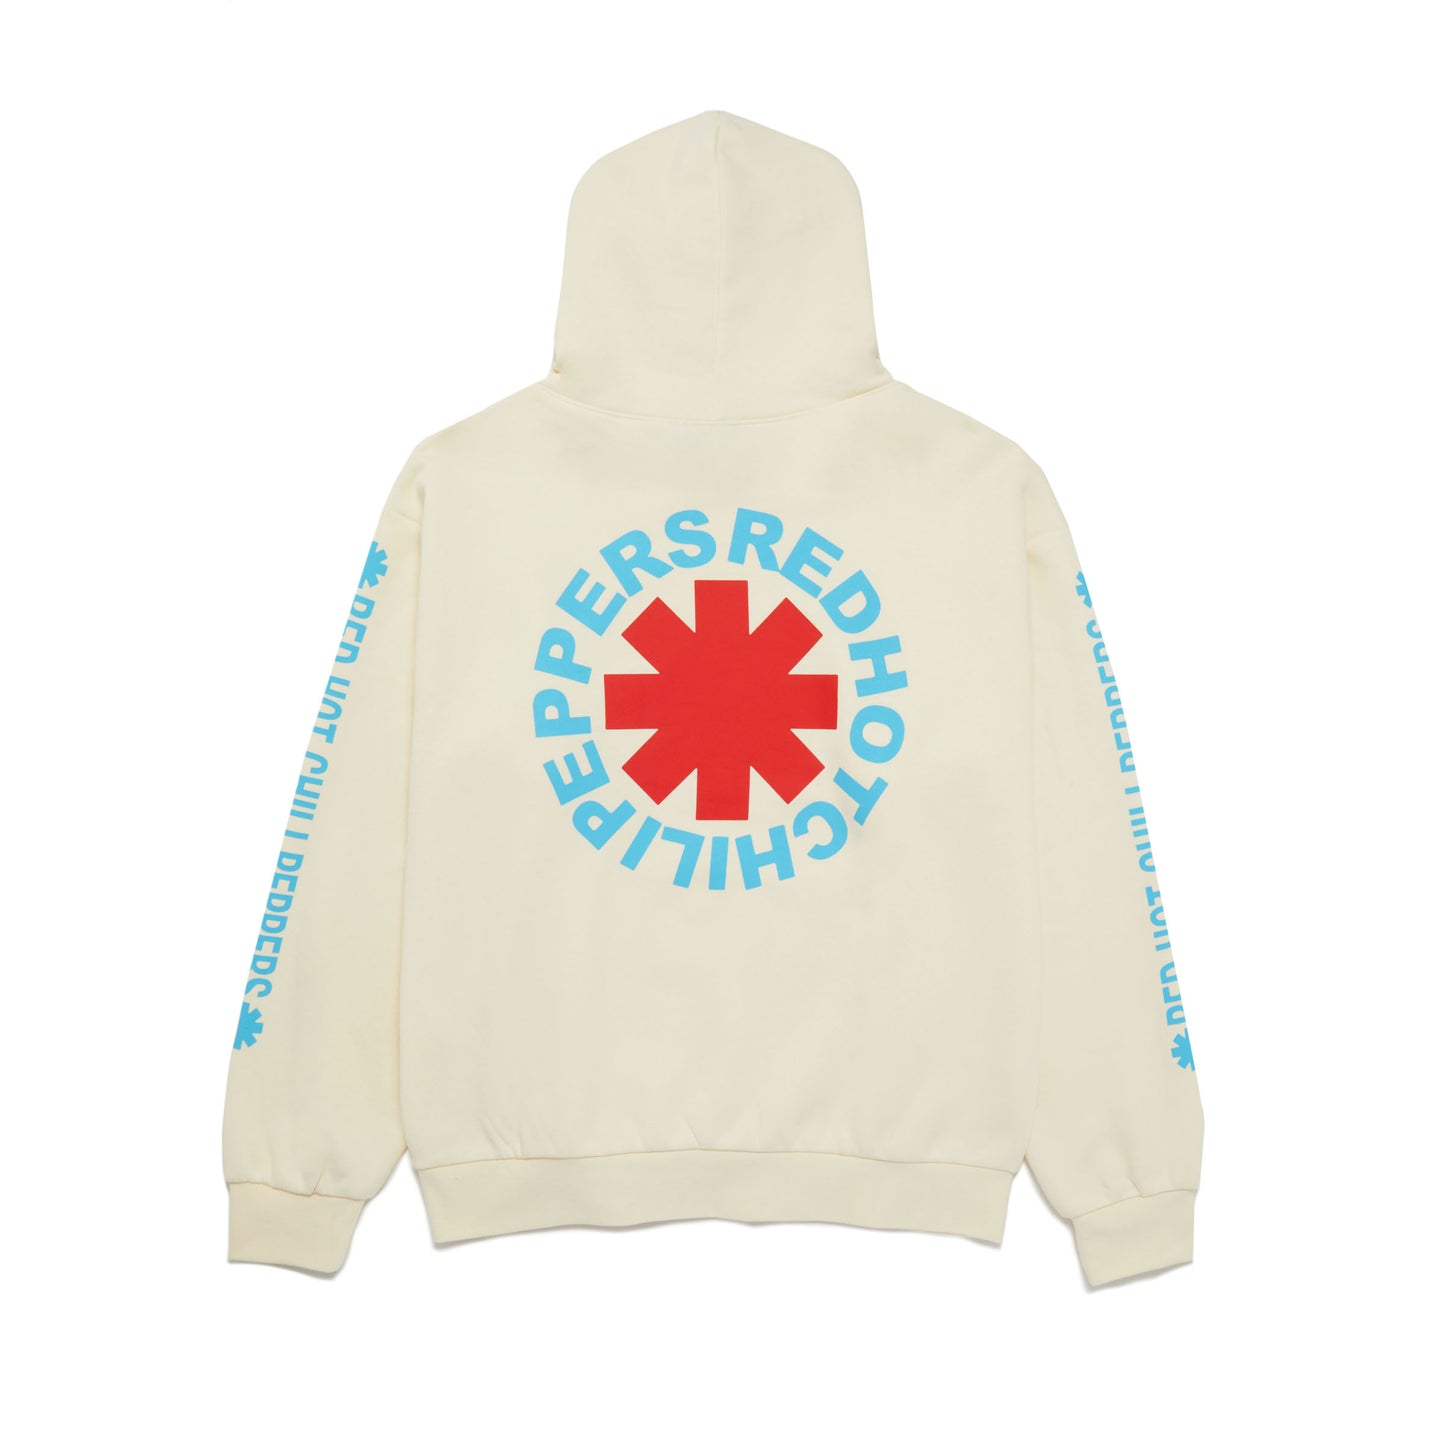 Unlimited Love USA Tour Hoodie – Red Hot Chili Peppers